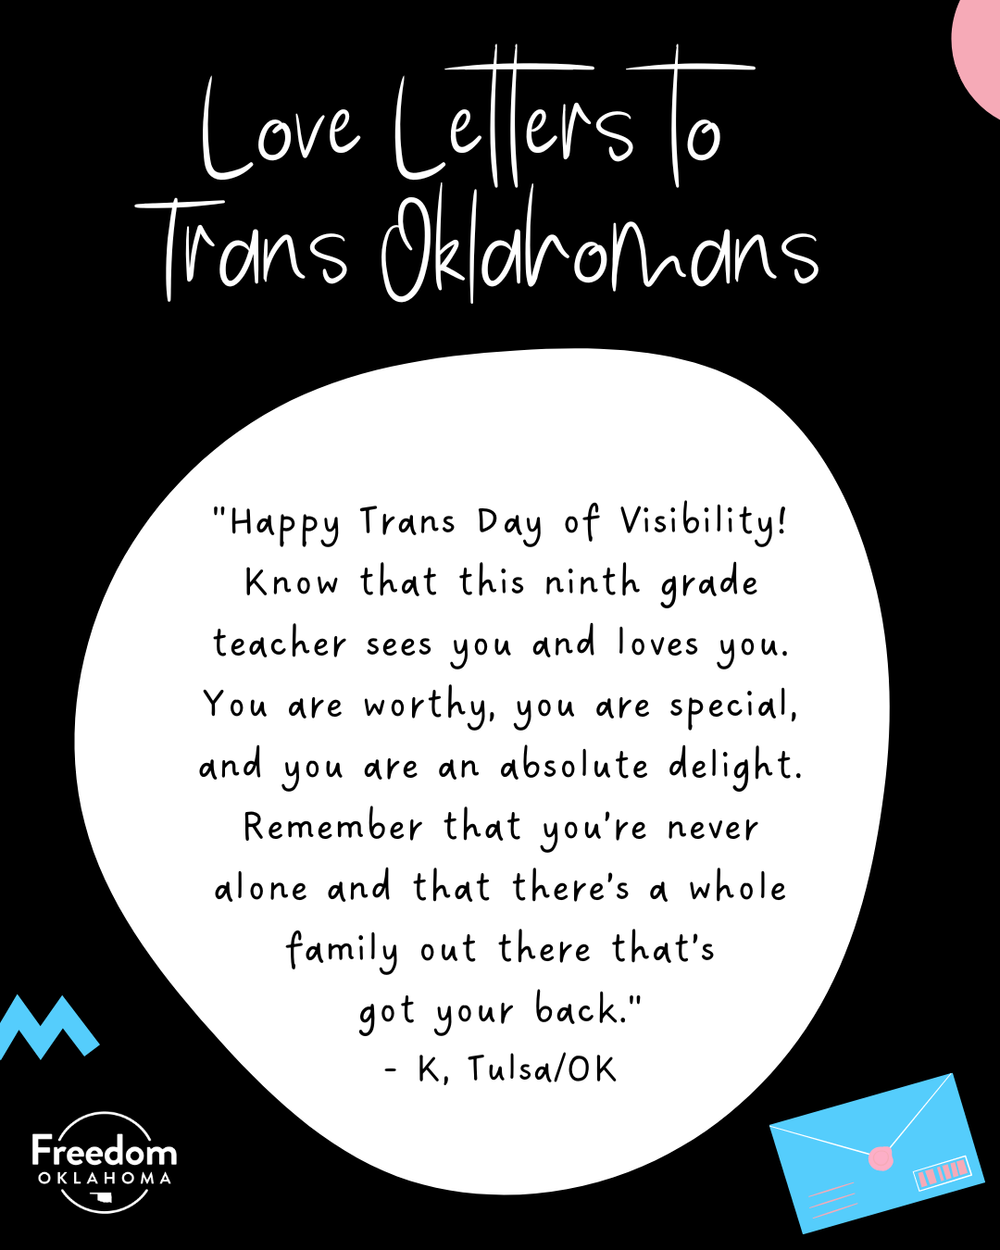  Similar black graphic with a white blob with text: "Happy Trans Day of Visibility! Know that this ninth grade teacher sees you and loves you. You are worthy, you are special, and you are an absolute delight. Remember that you’re never alone and that